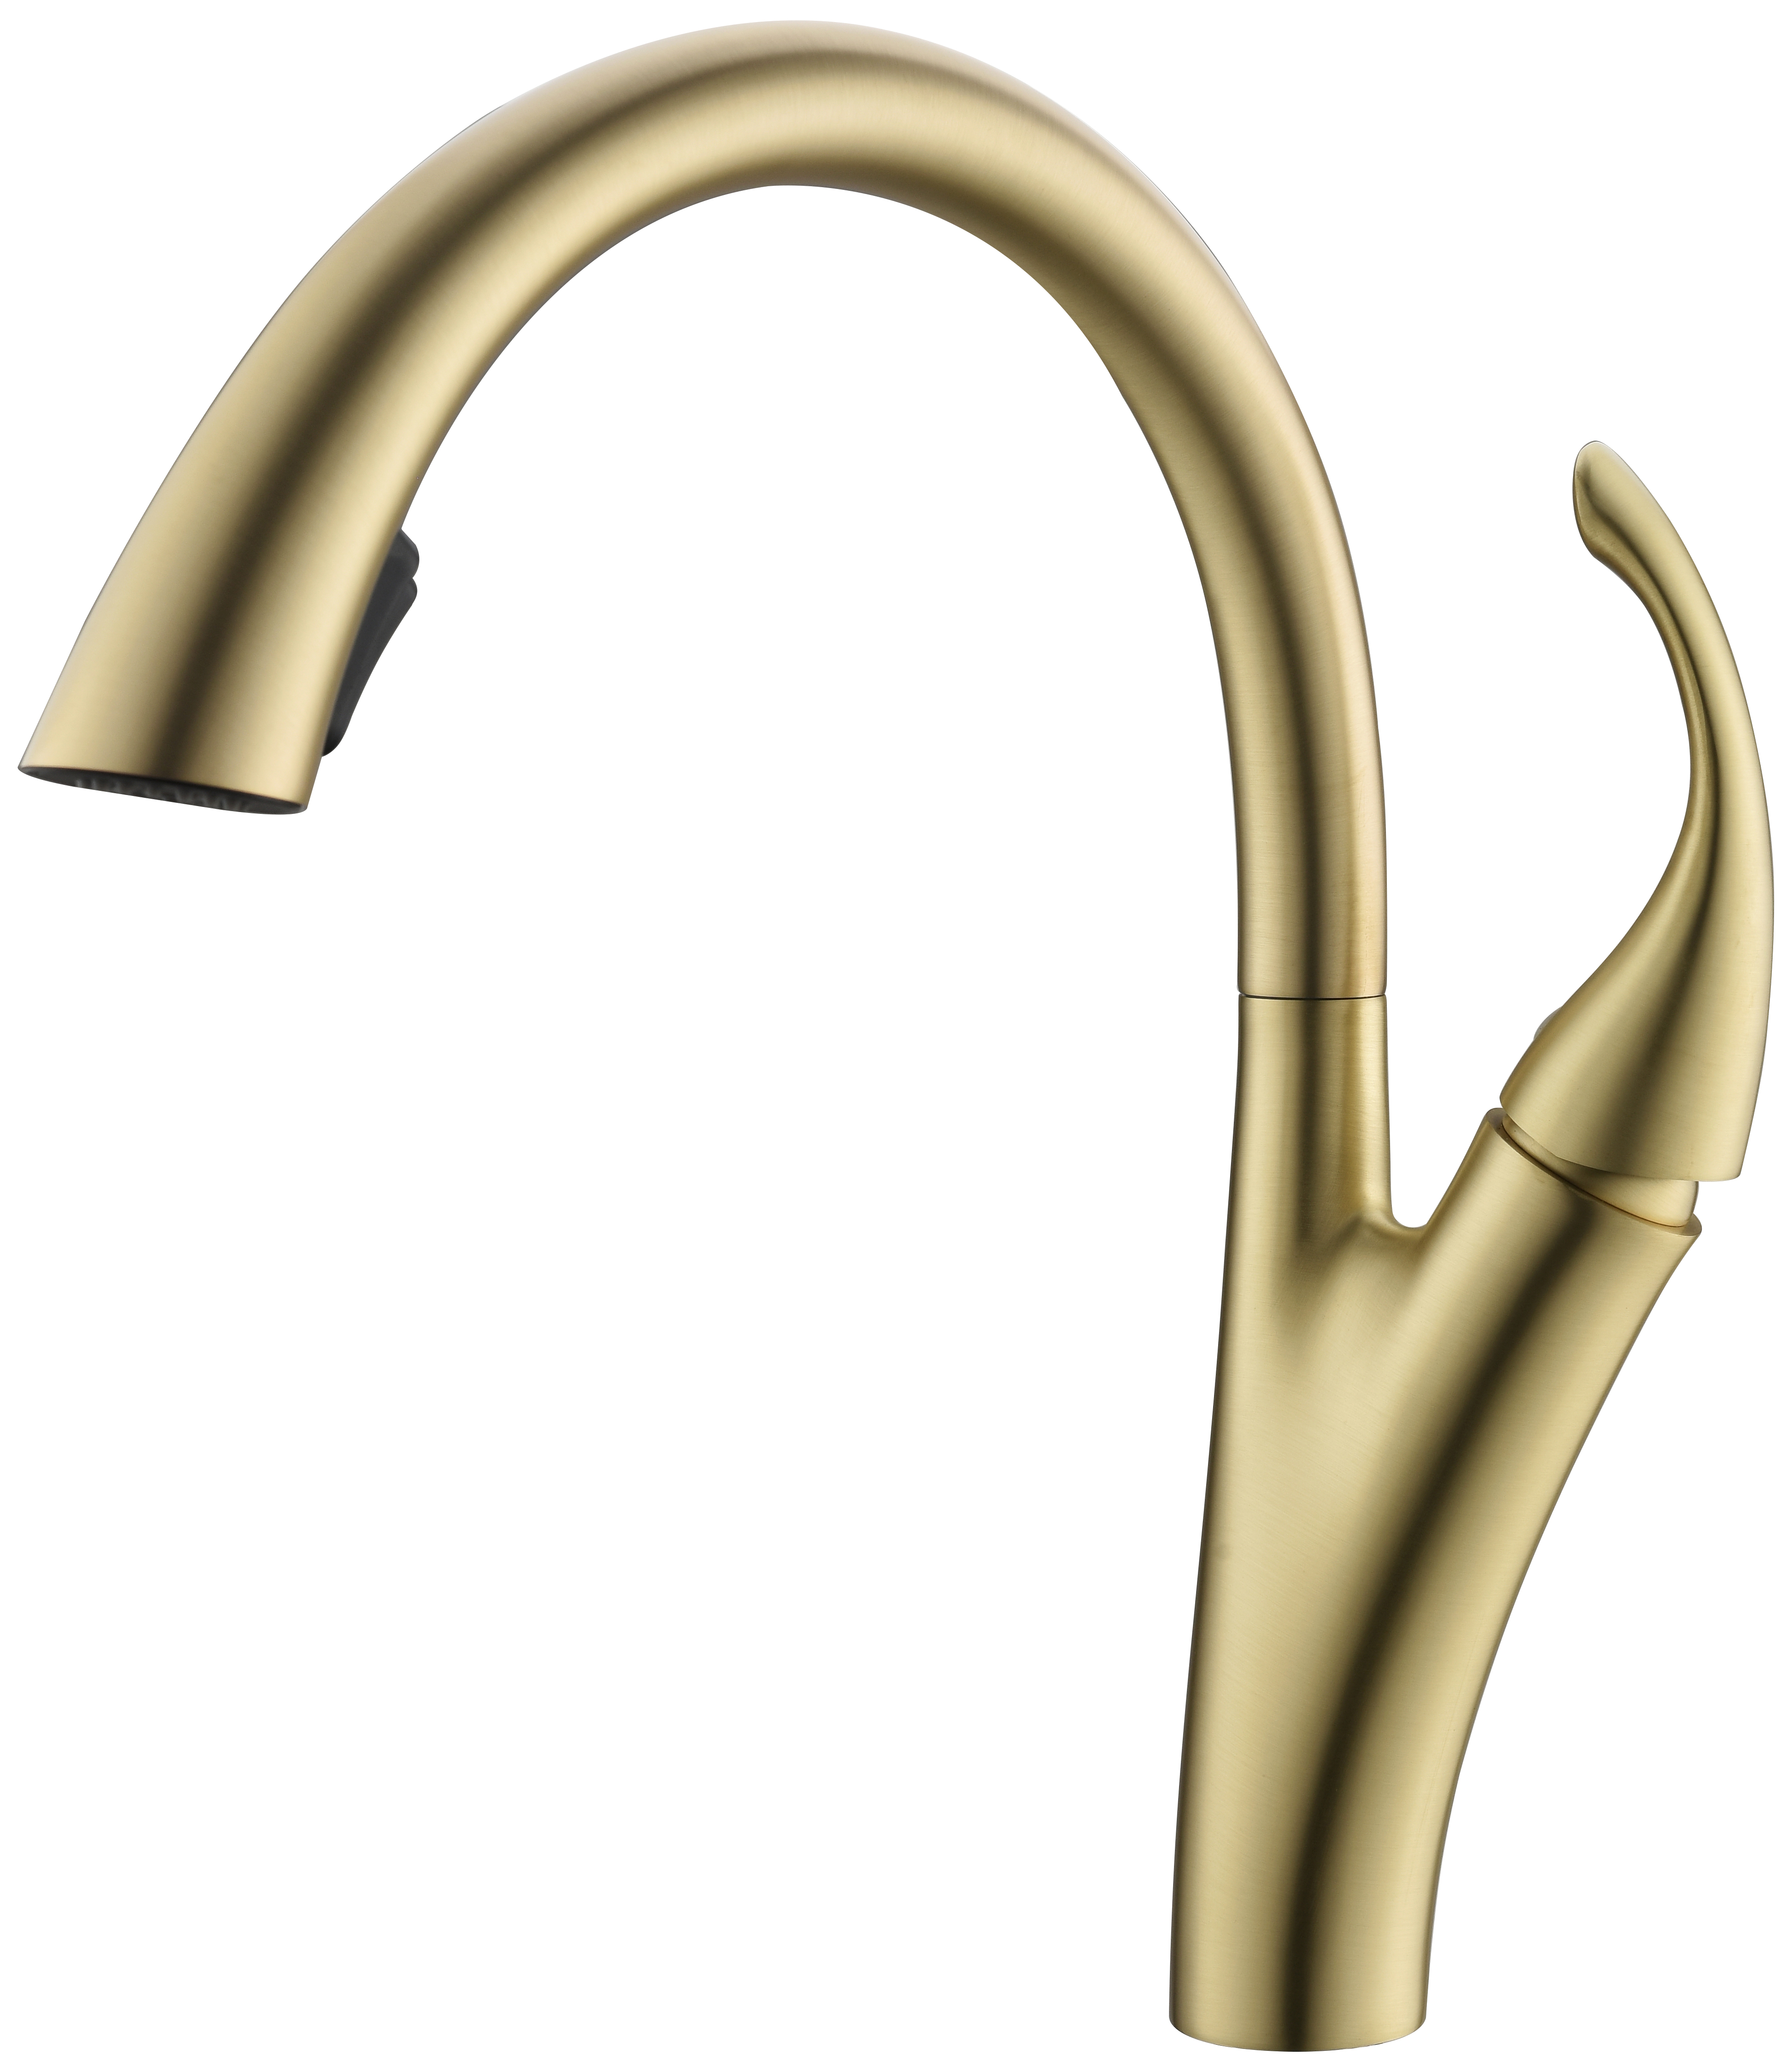 Brand New Gold Pull Out Rotating Taps Kitchen Faucet With High Quality